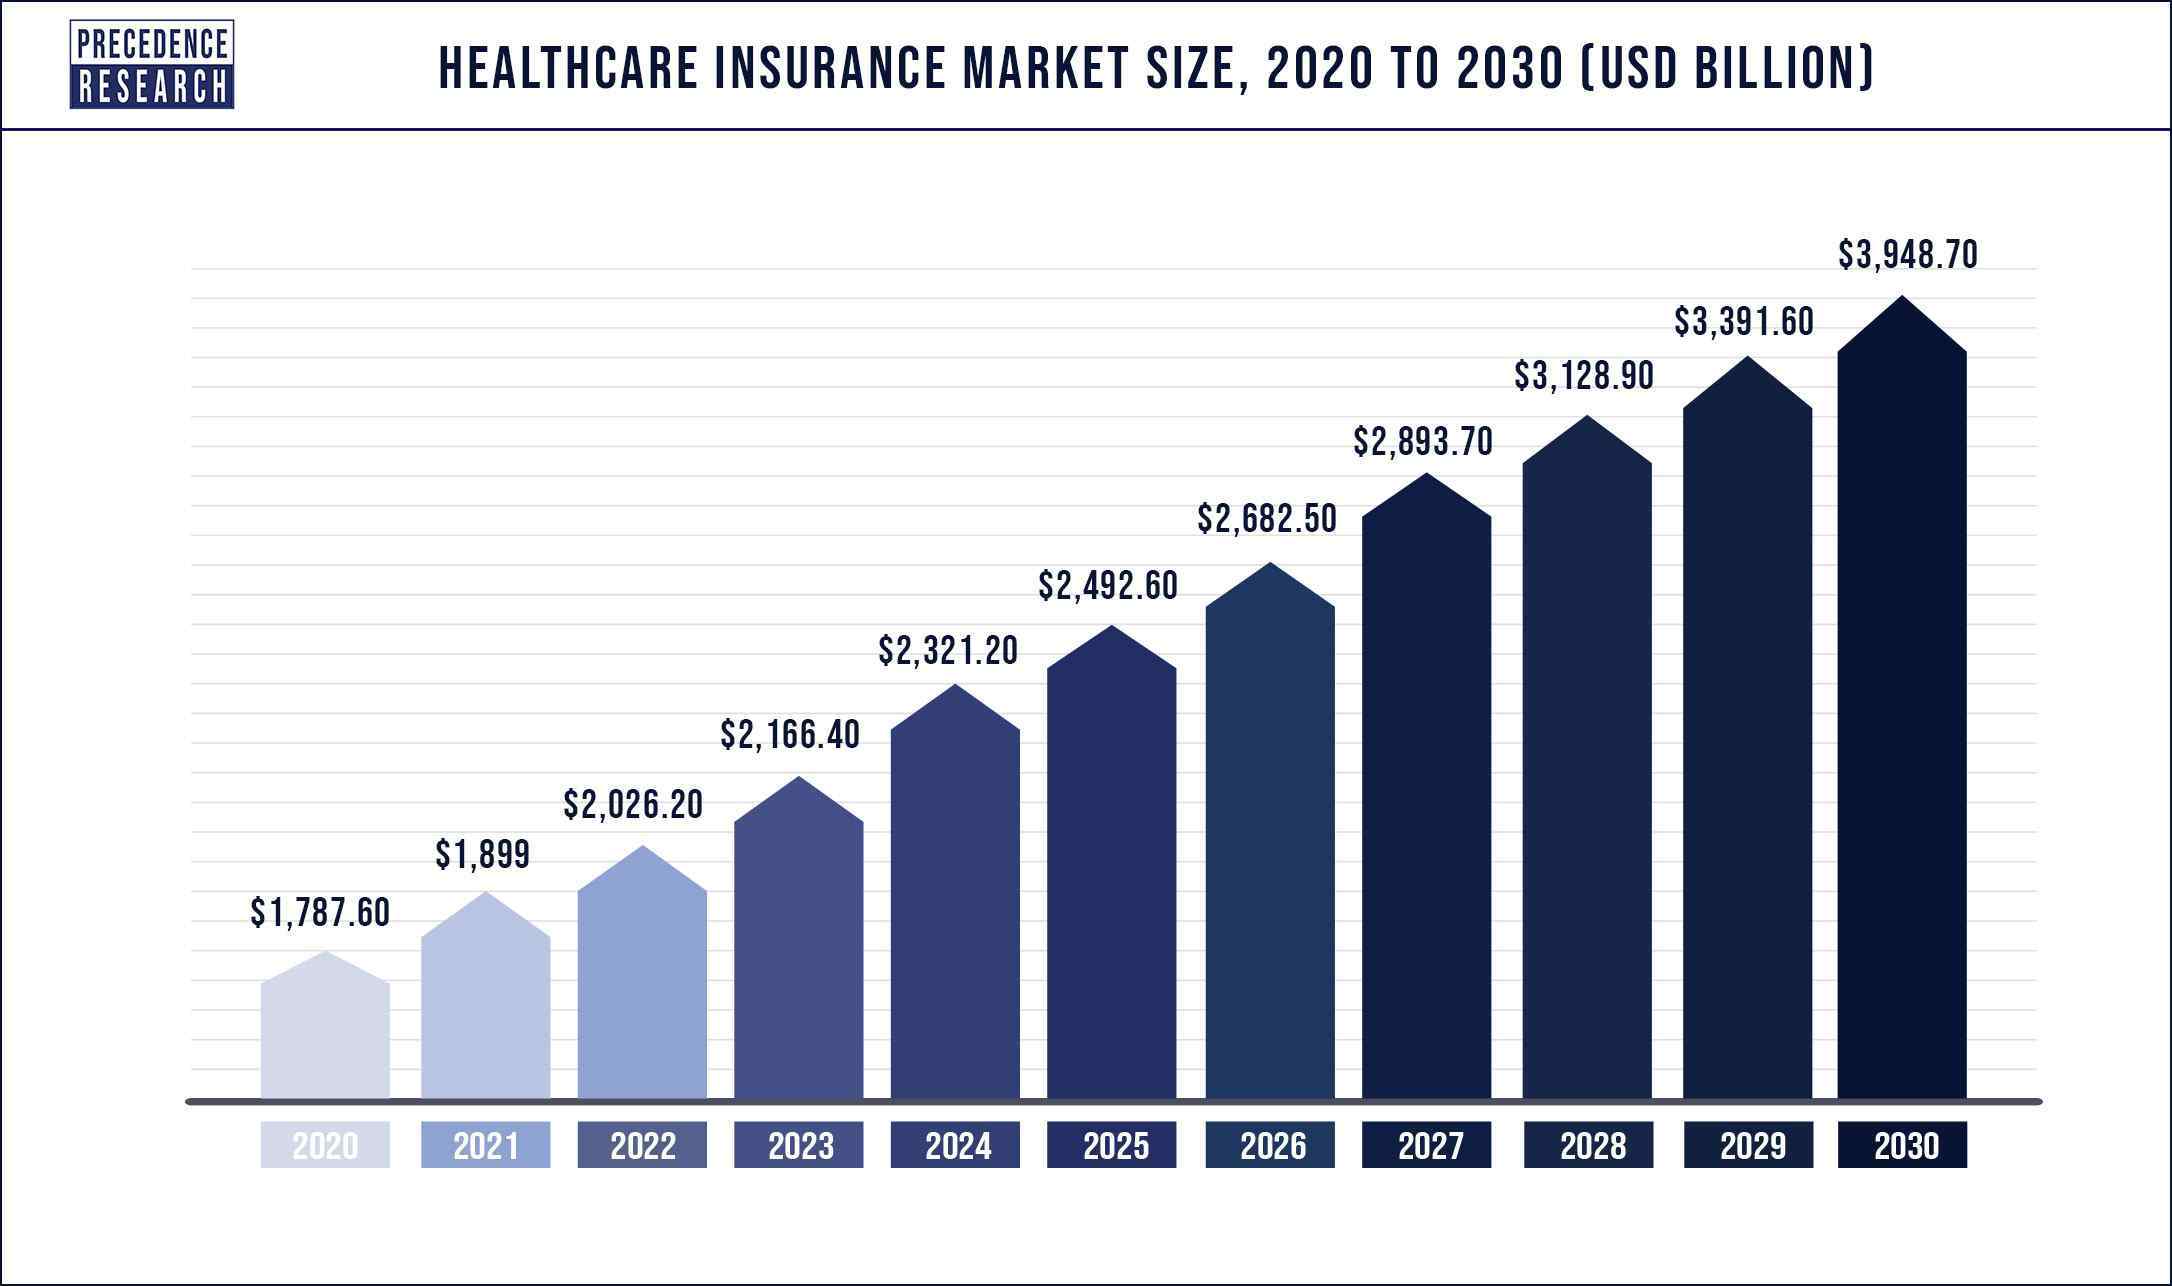 Healthcare Insurance Market Size 2020 to 2030